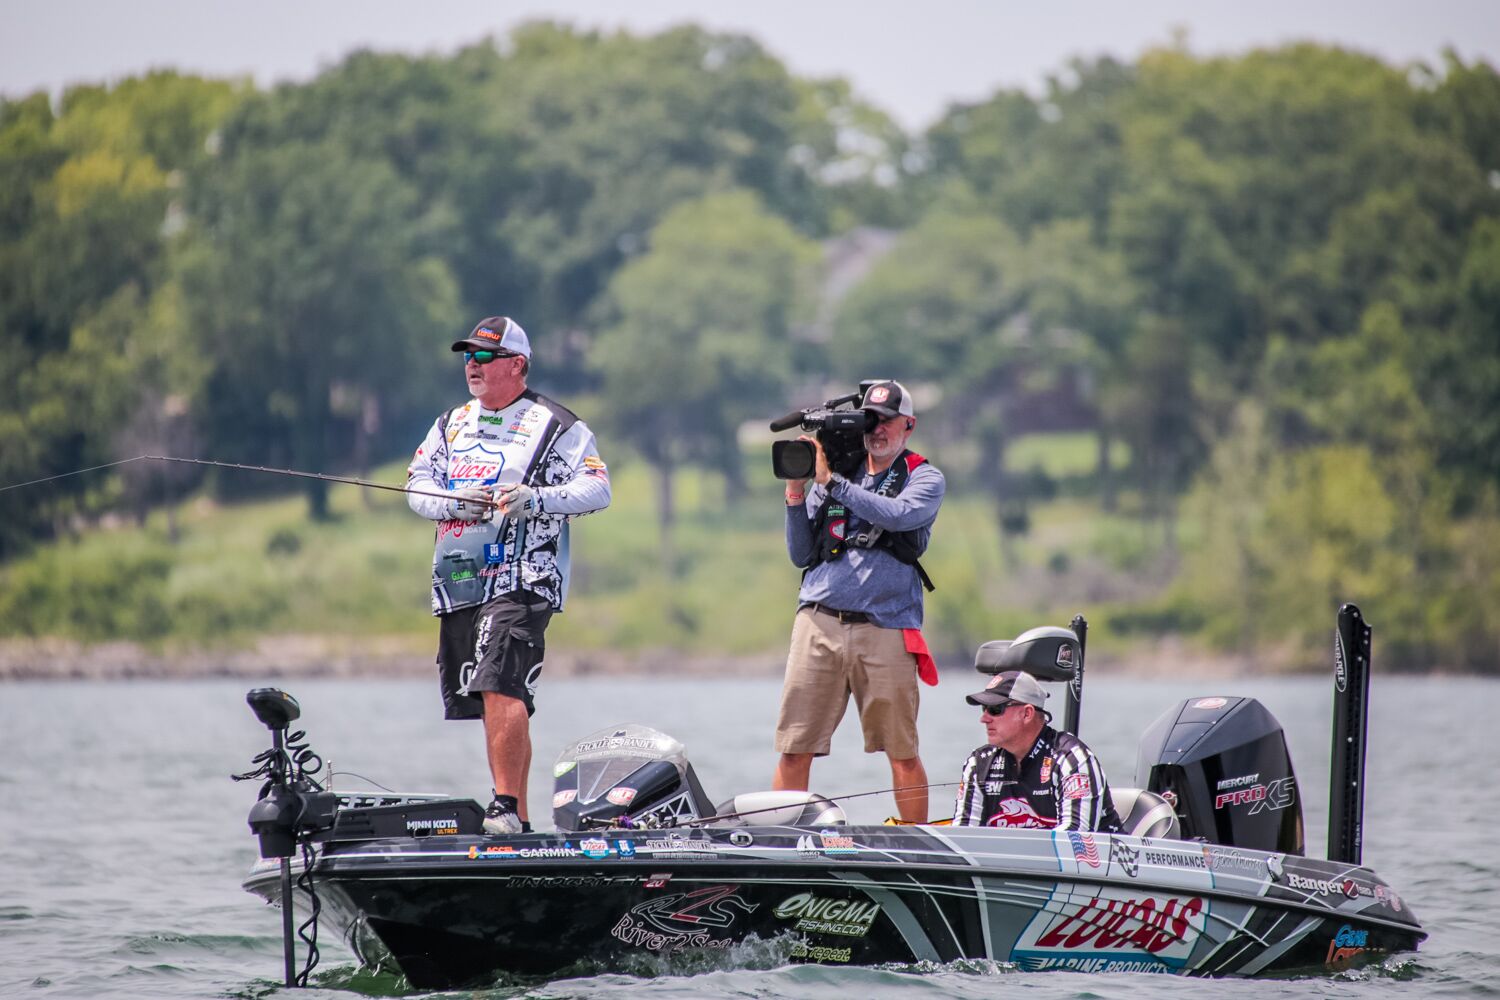 Why the Wakebait? Three Pros Share Their Keys to Wakebait Success